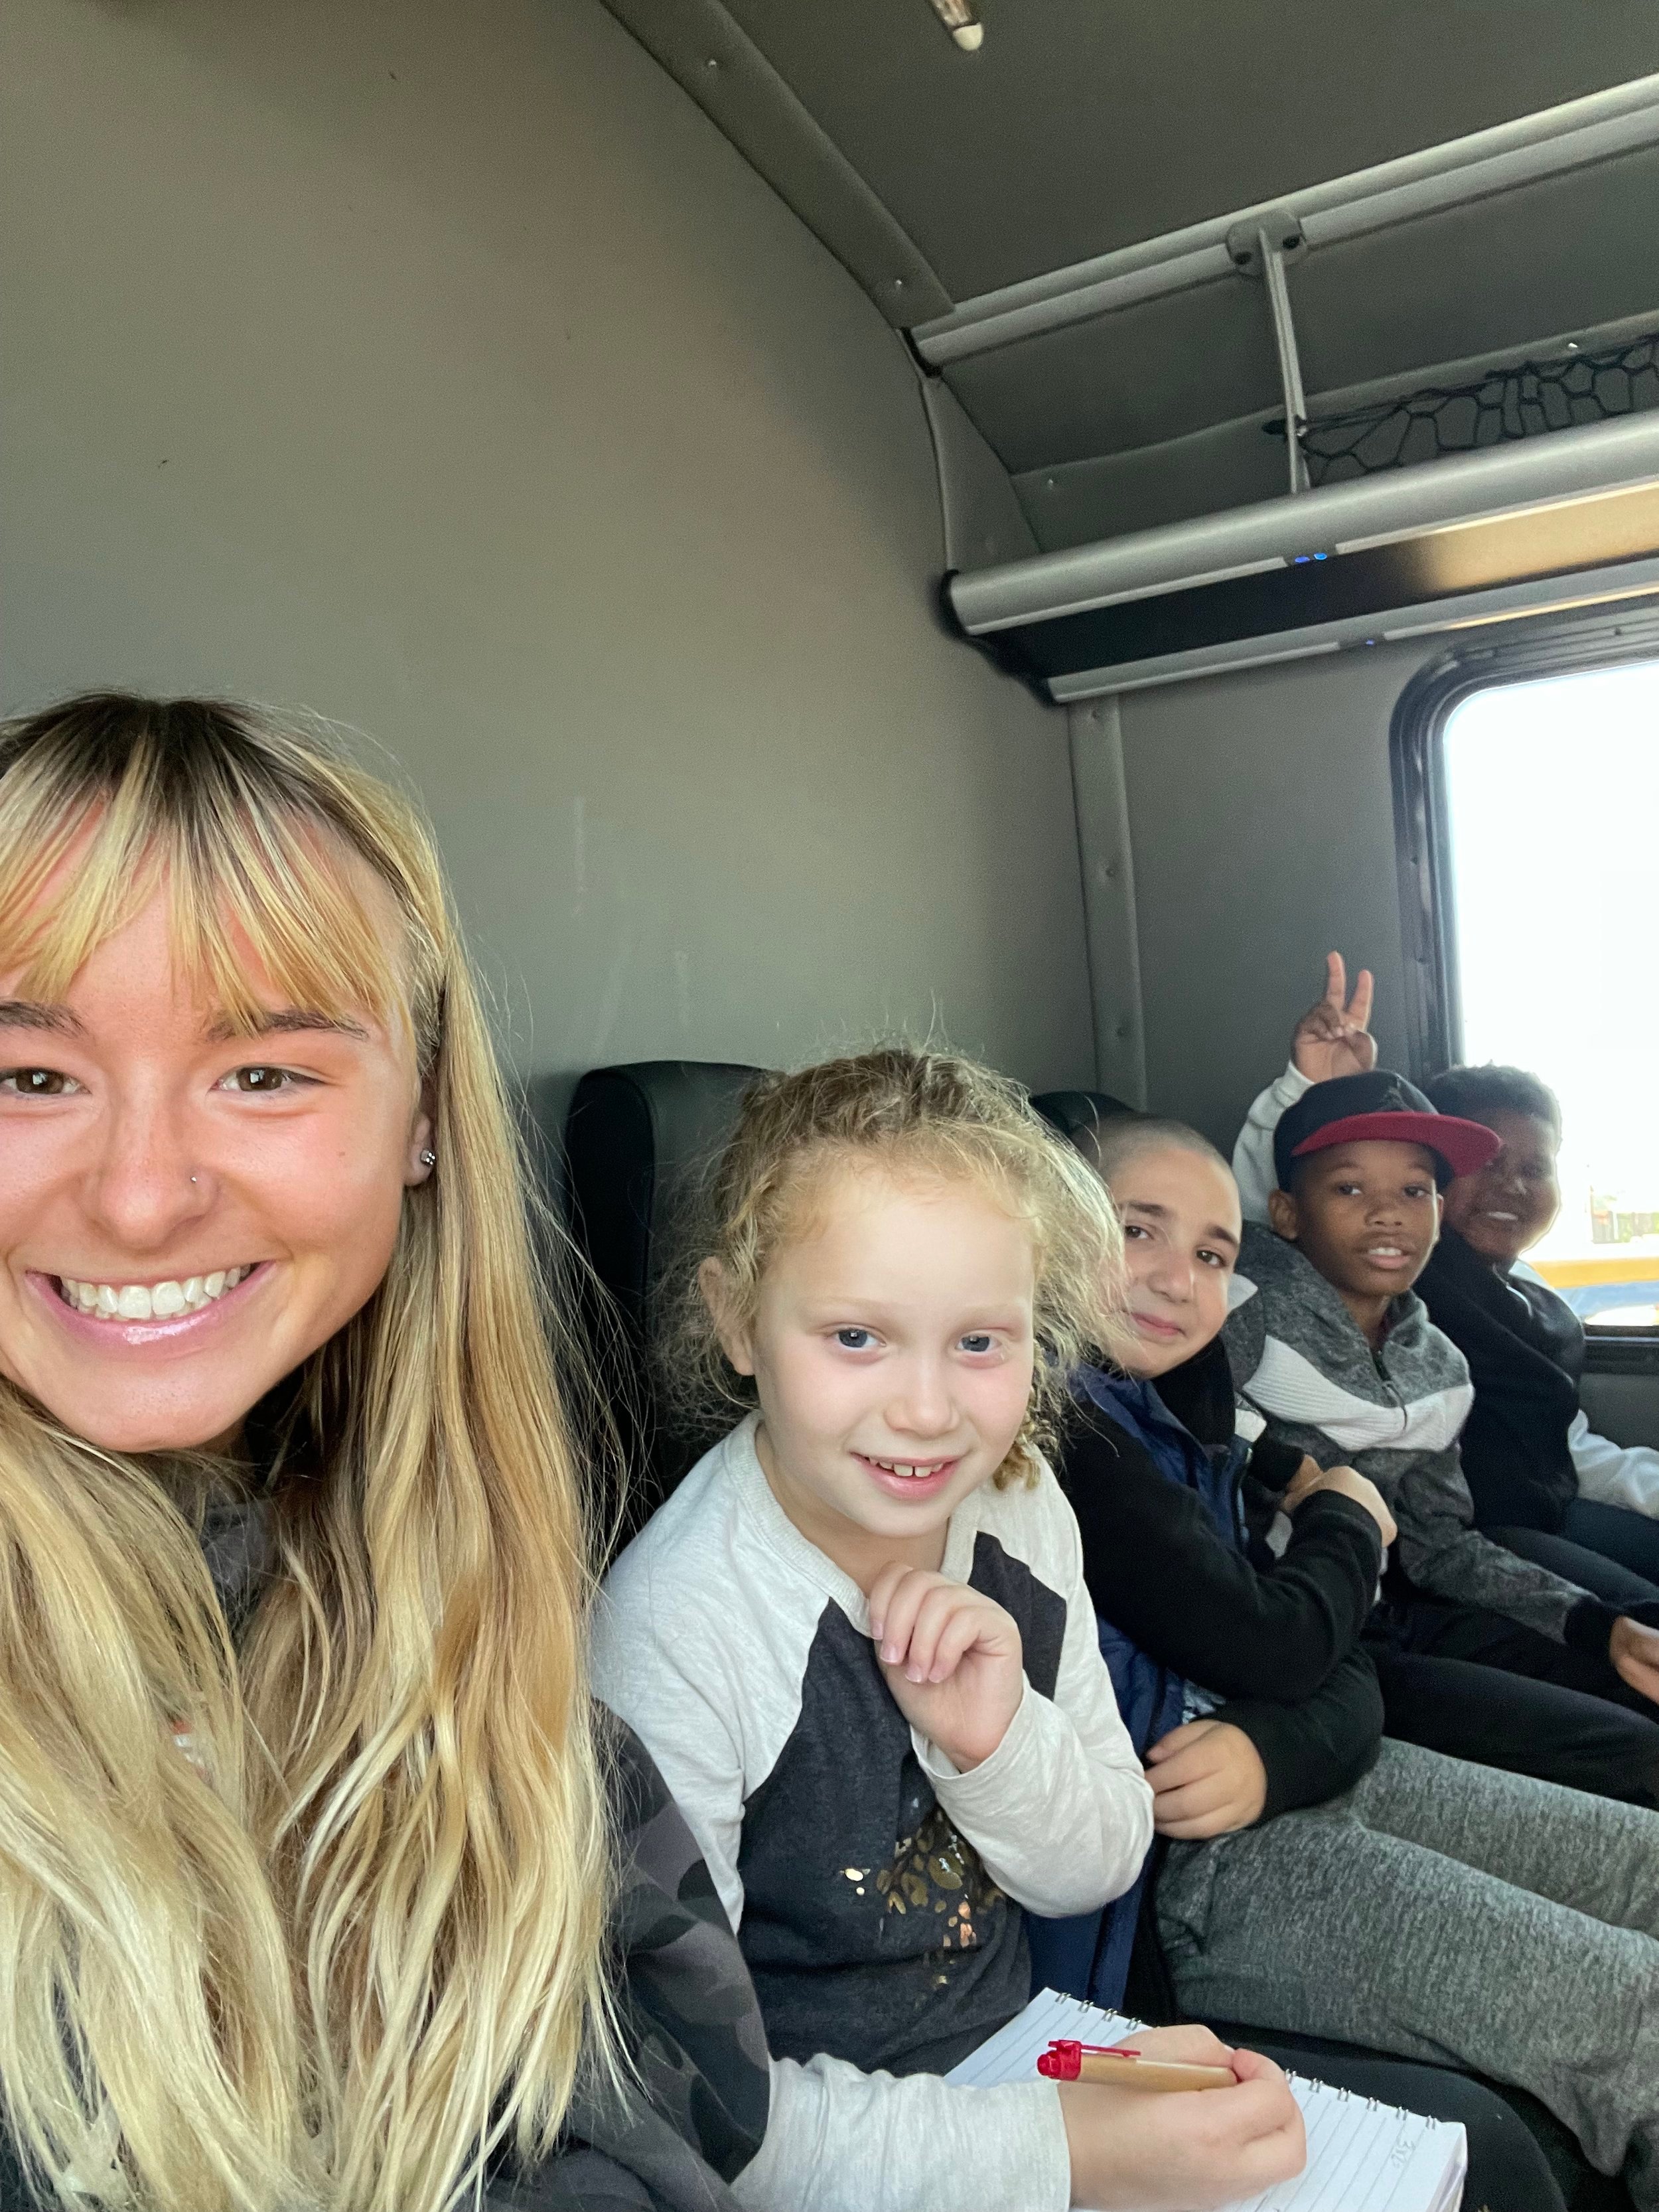 Bus ride fun at overnight camp for Corlears Elementary students